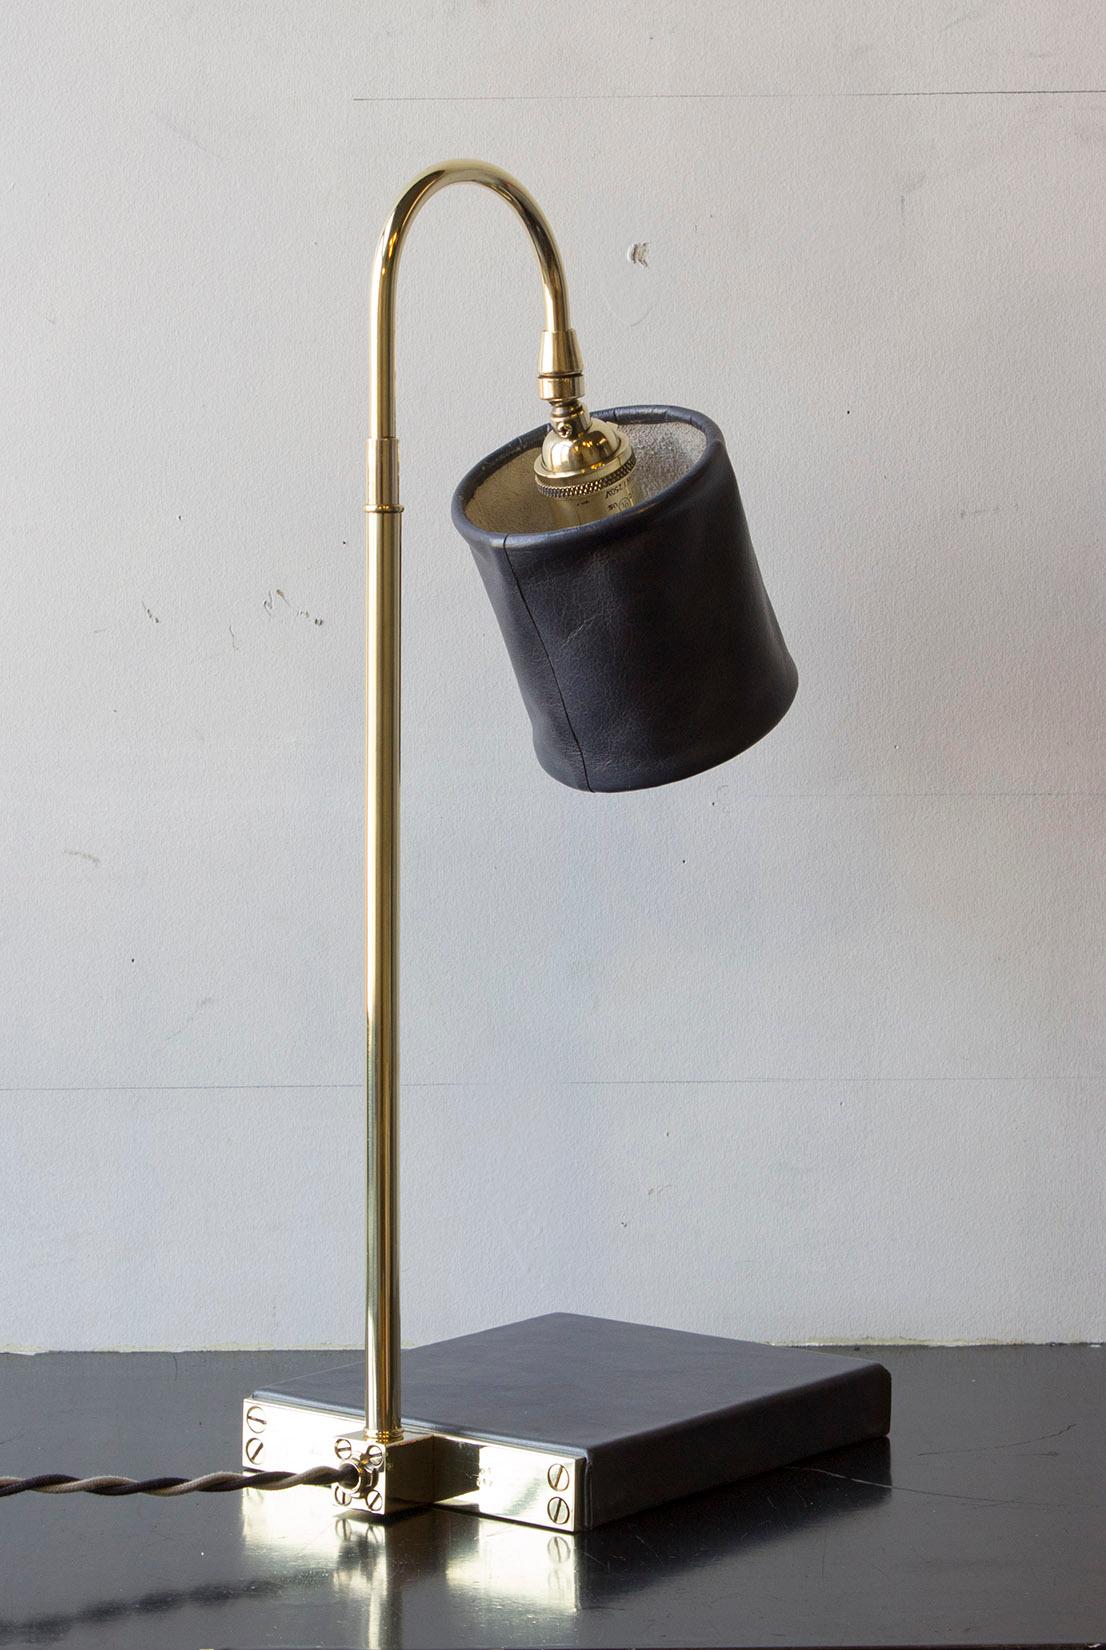 Solid machined brass in polished unlacquered finish, hand-dyed and waxed leather wrapped wood, soft unstructured pivoting leather shade, hand-dyed braided cotton cord. All material finishes are living finishes: they will change and patina for the